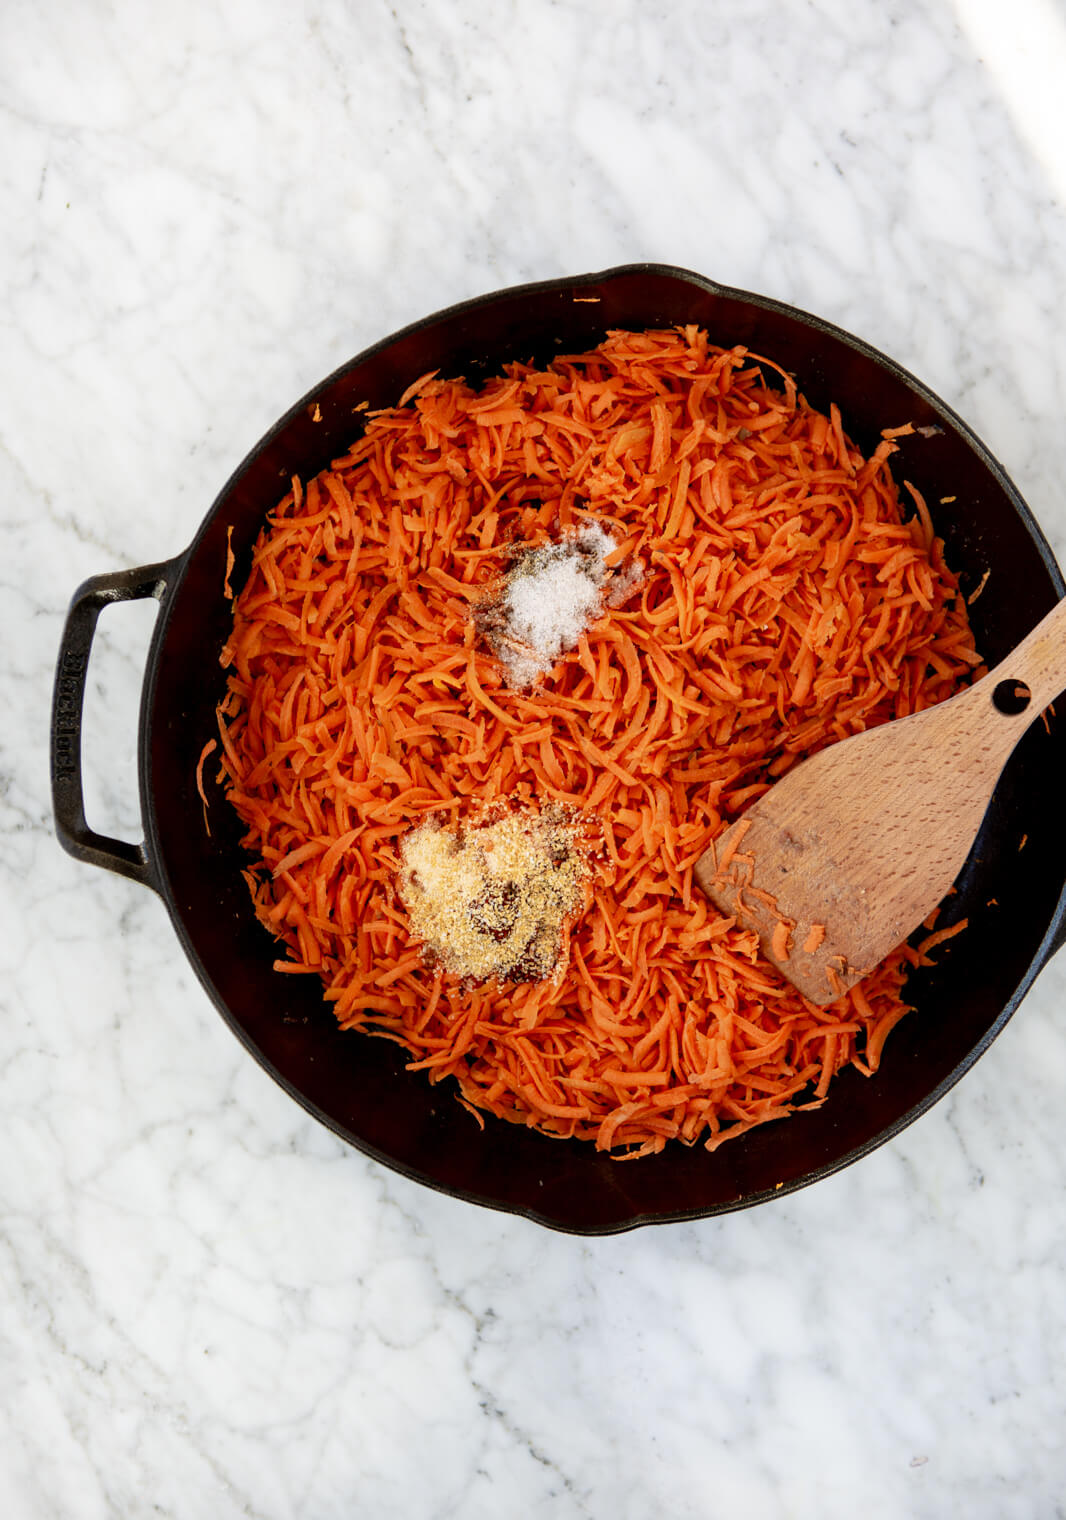 Cast iron skillet with shredded carrots evenly spread on bottom topped with spices.